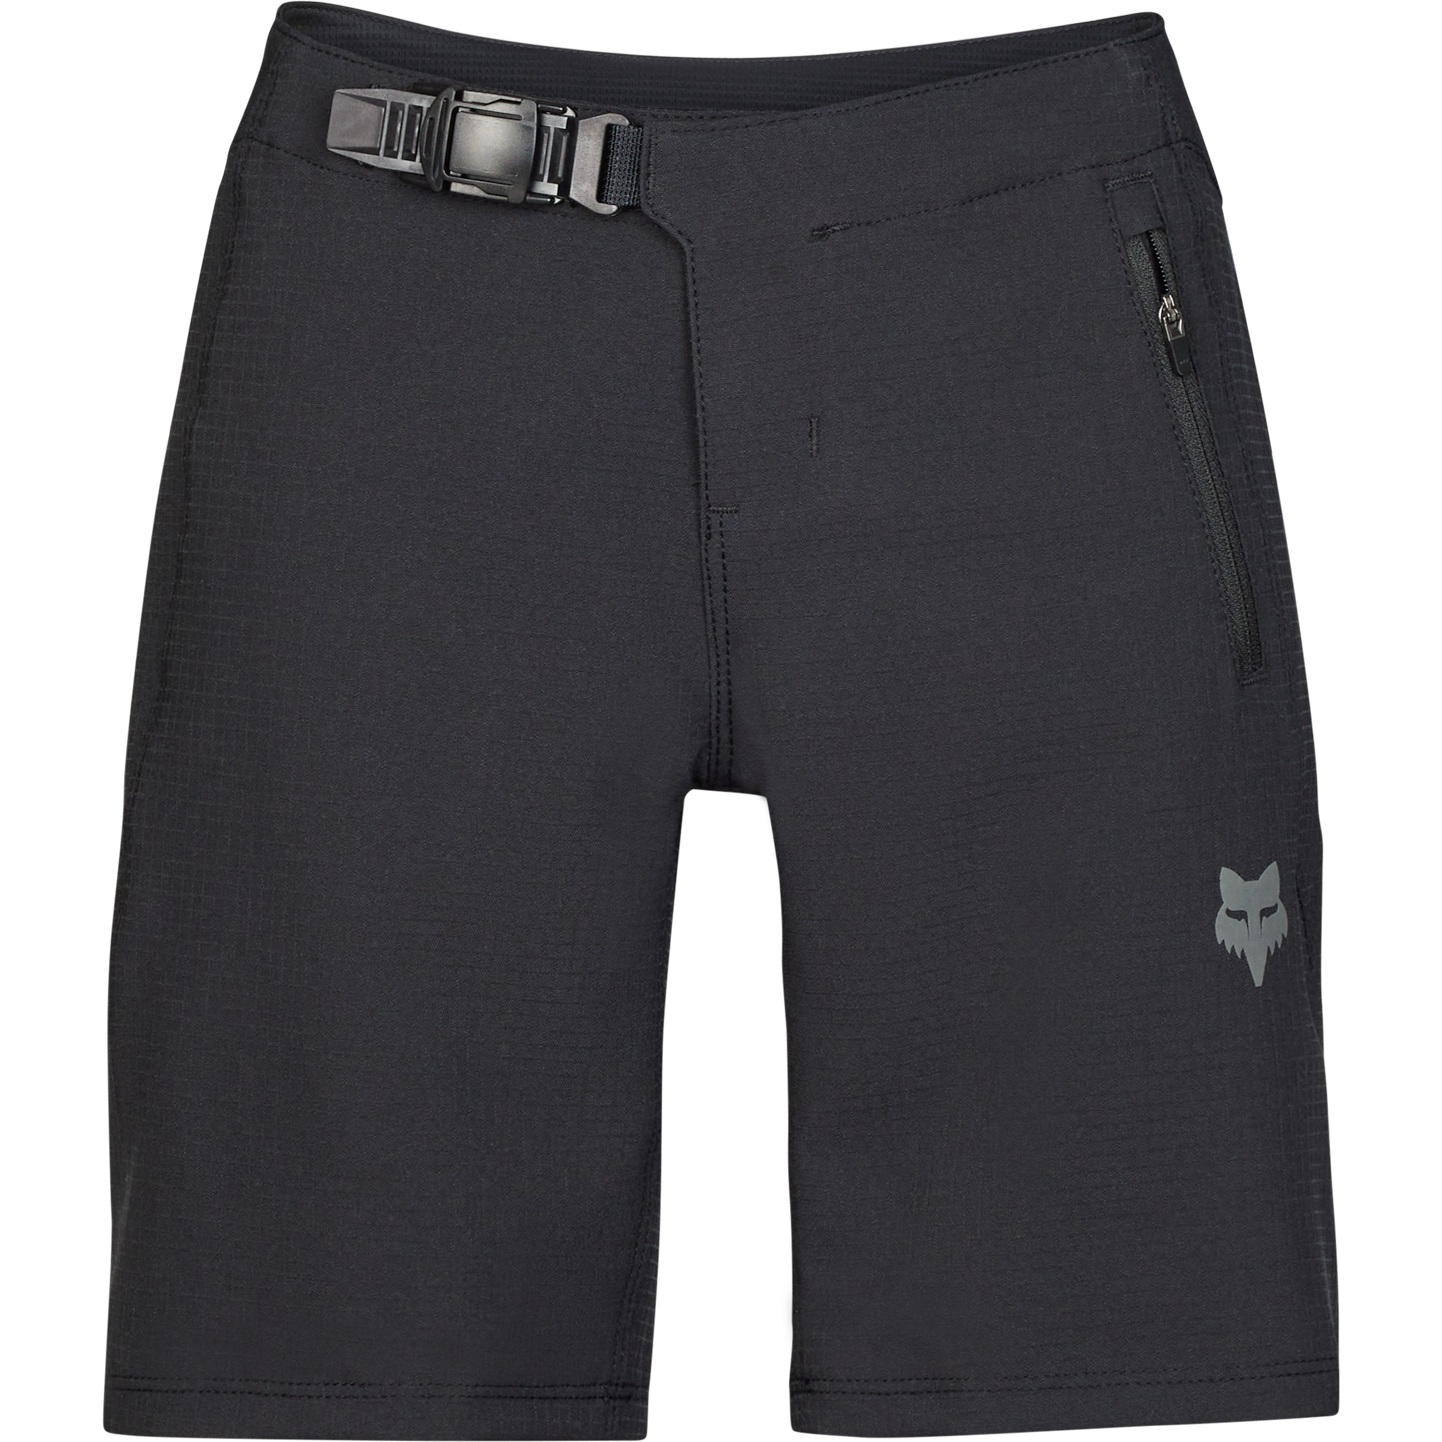 Picture of FOX Defend MTB Shorts Youth - black